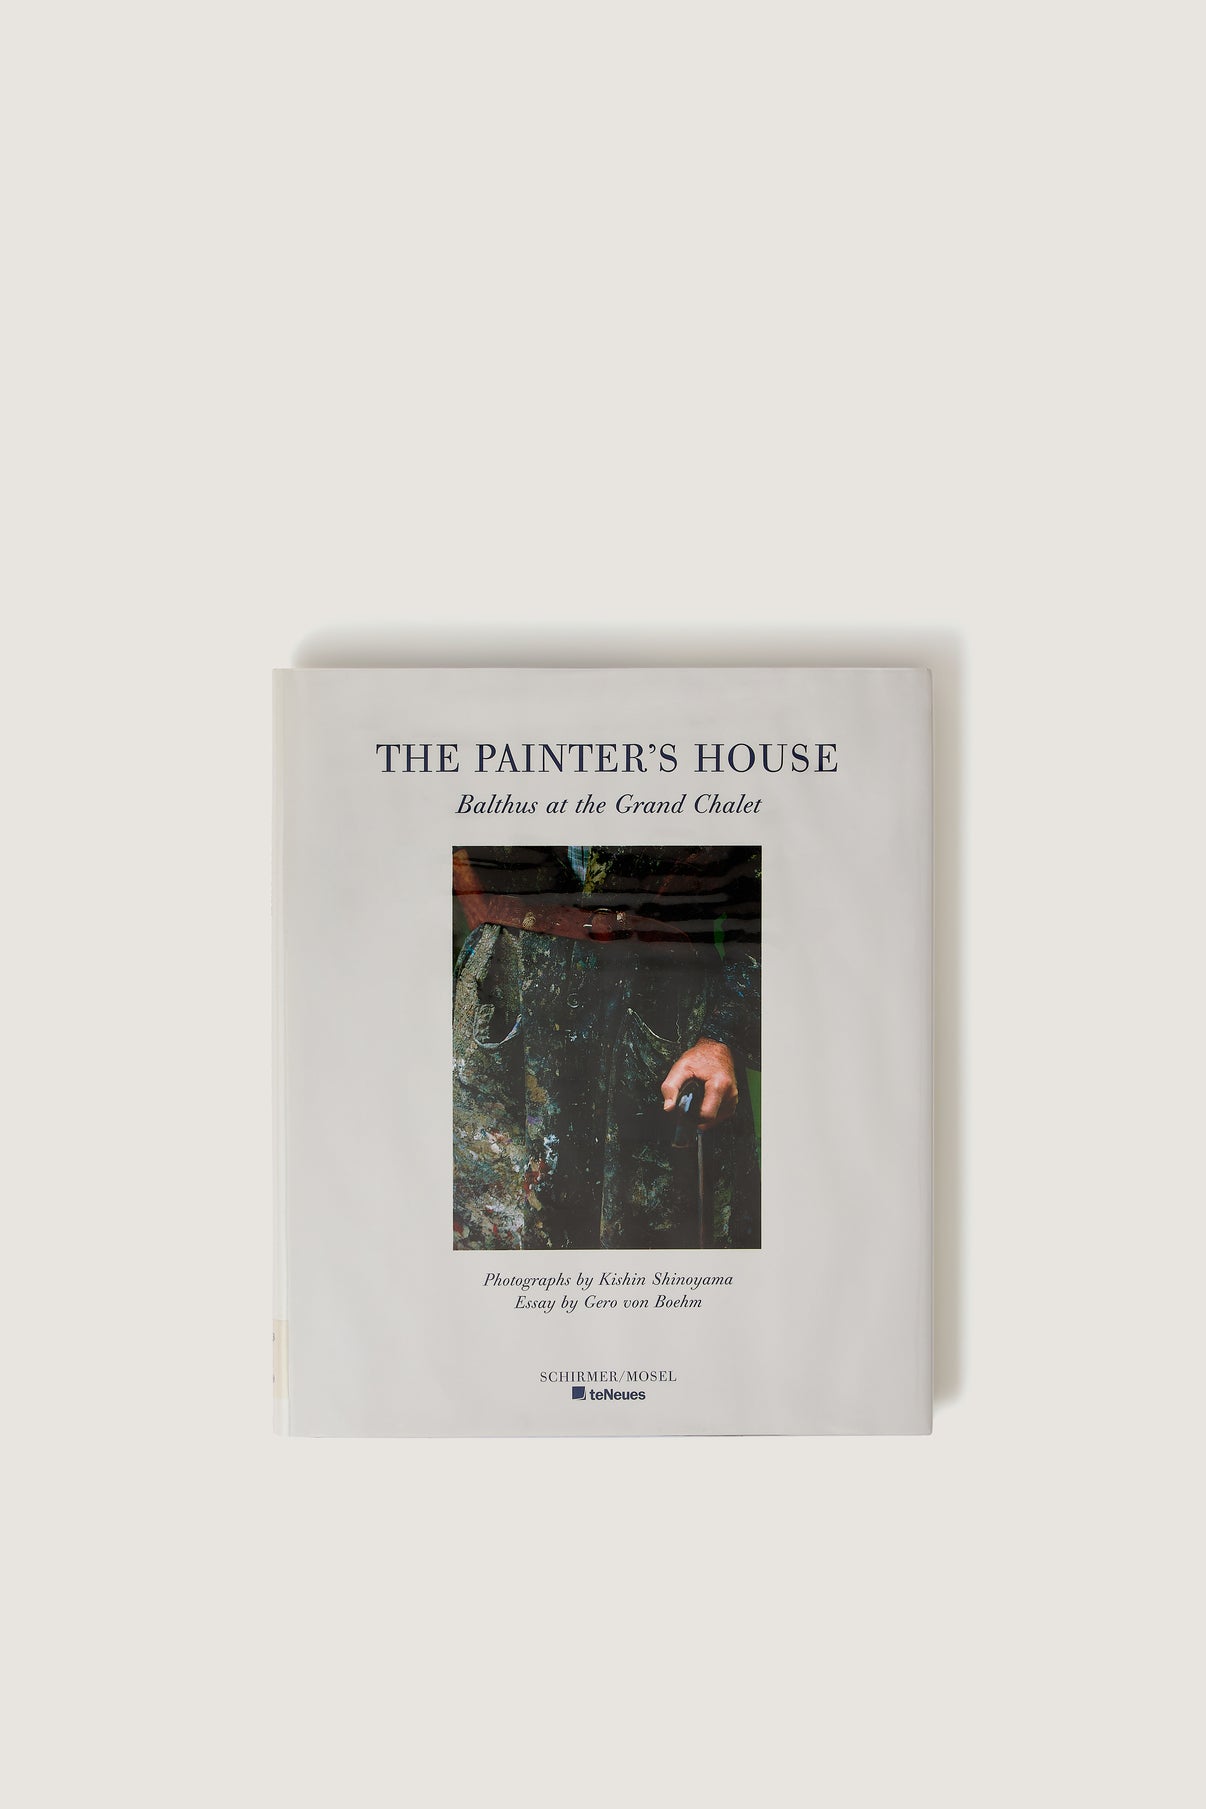 BOOK "THE PAINTER'S HOUSE : BALTHUS AT THE GRAND CHALET" vue 1